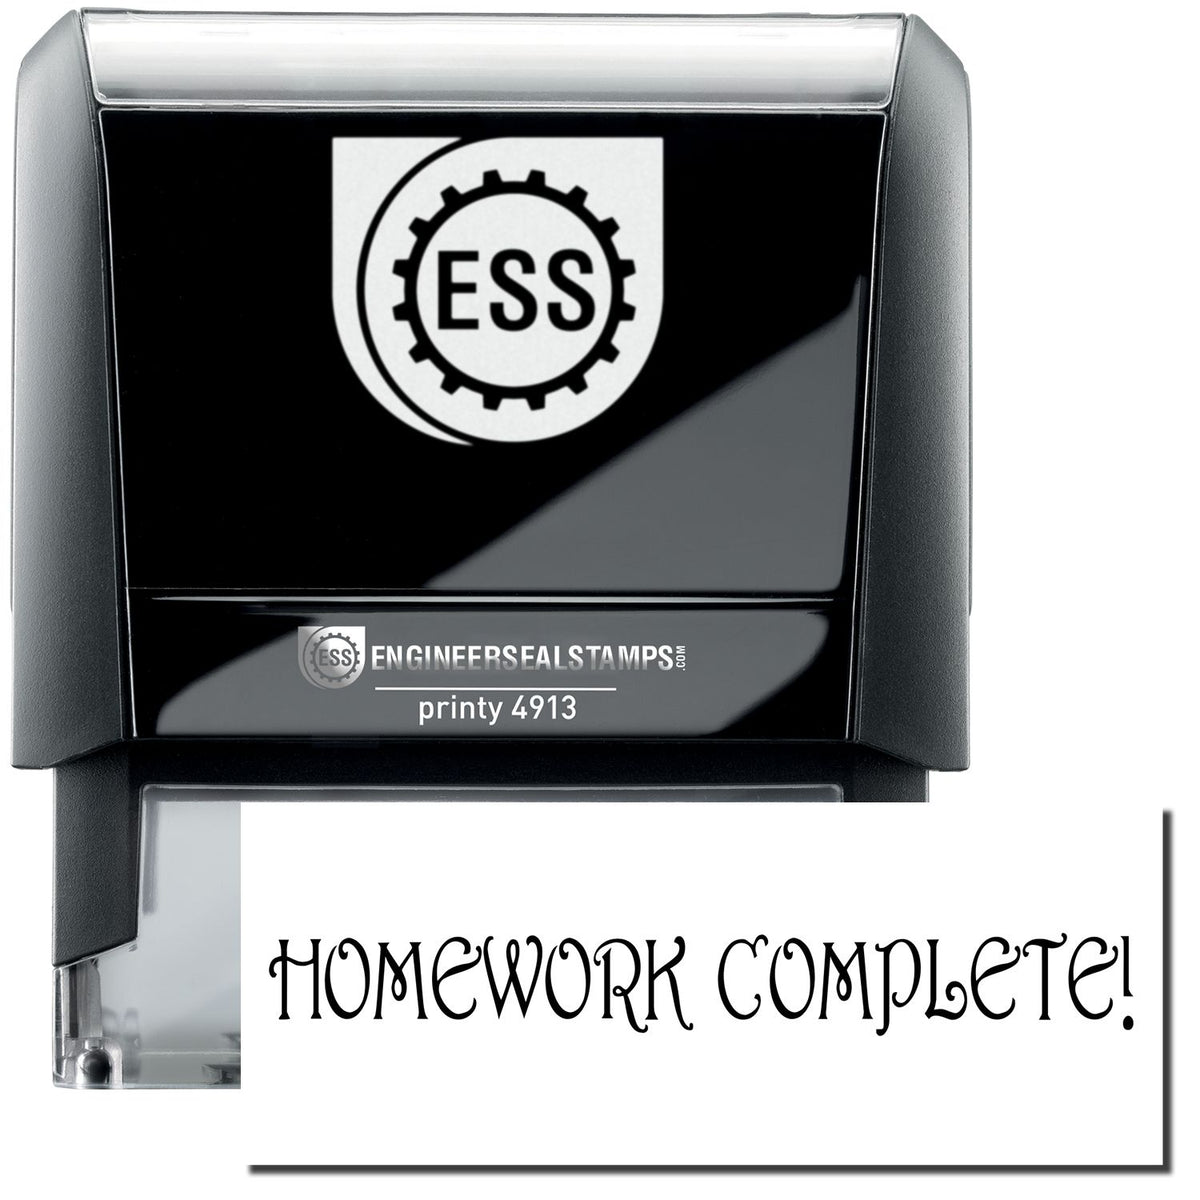 A self-inking stamp with a stamped image showing how the text &quot;HOMEWORK COMPLETE!&quot; in a large font is displayed by it after stamping.